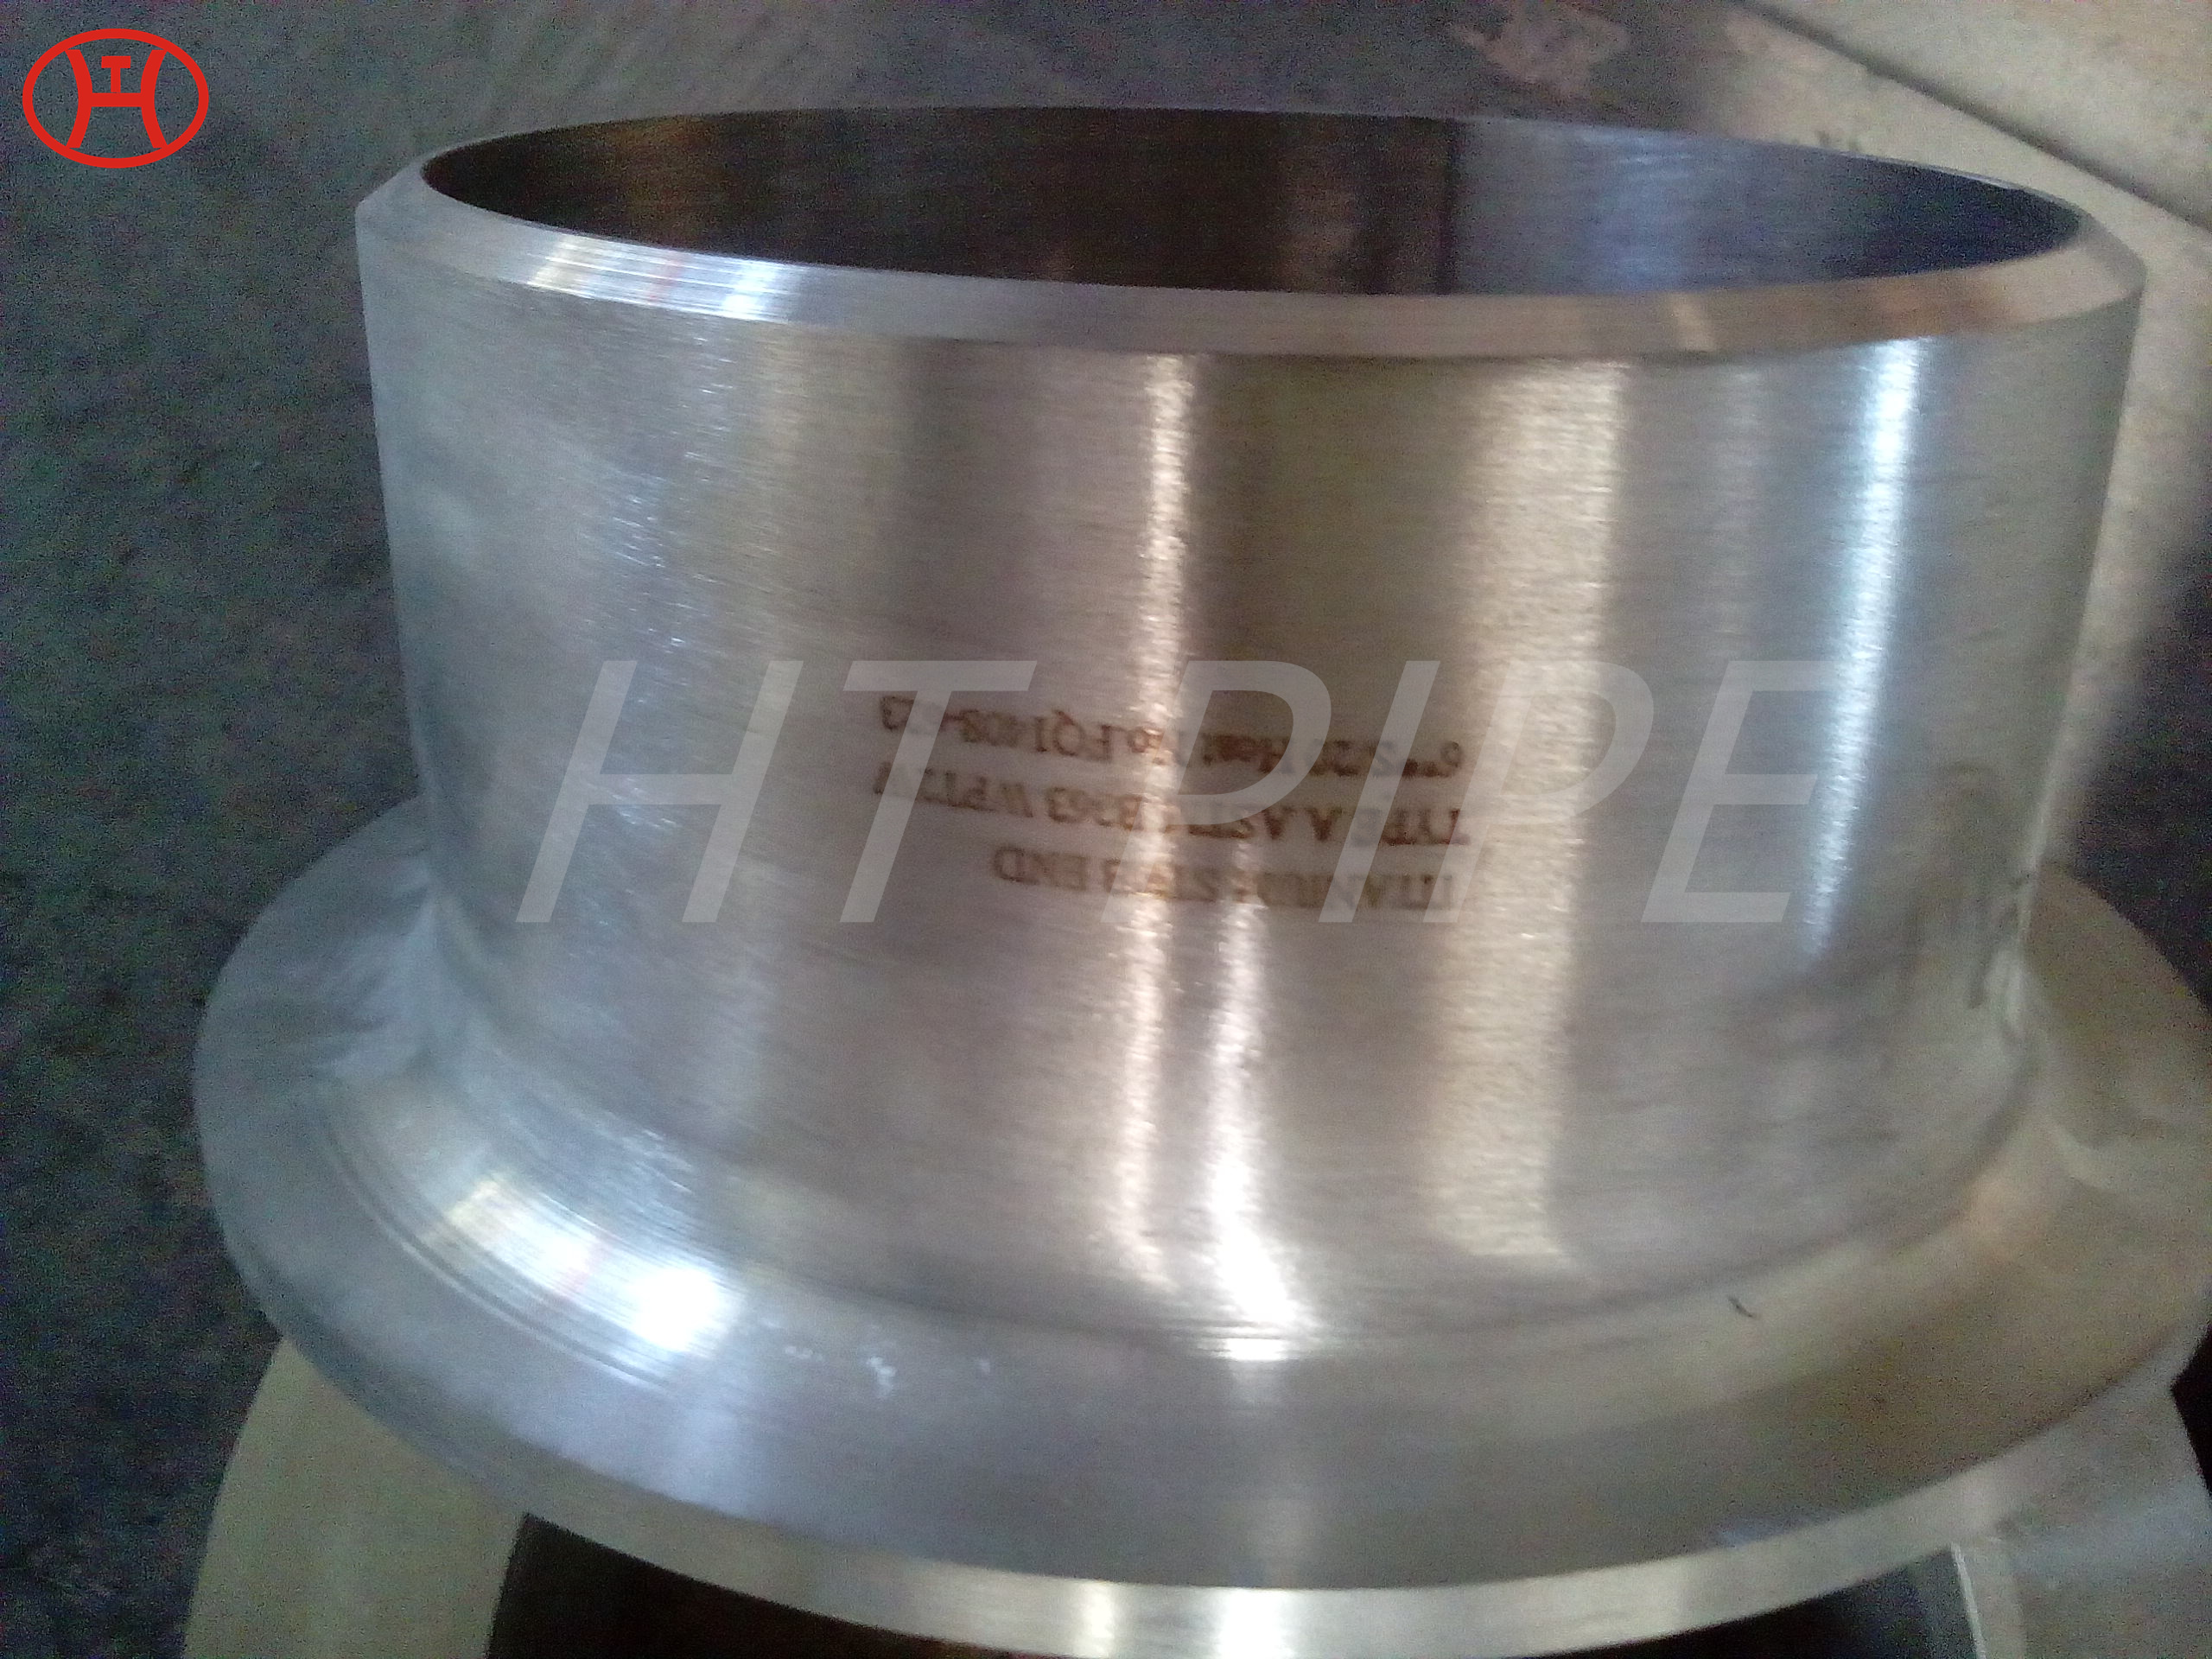 titanium pipe fittings stub end be polished to a high lustre